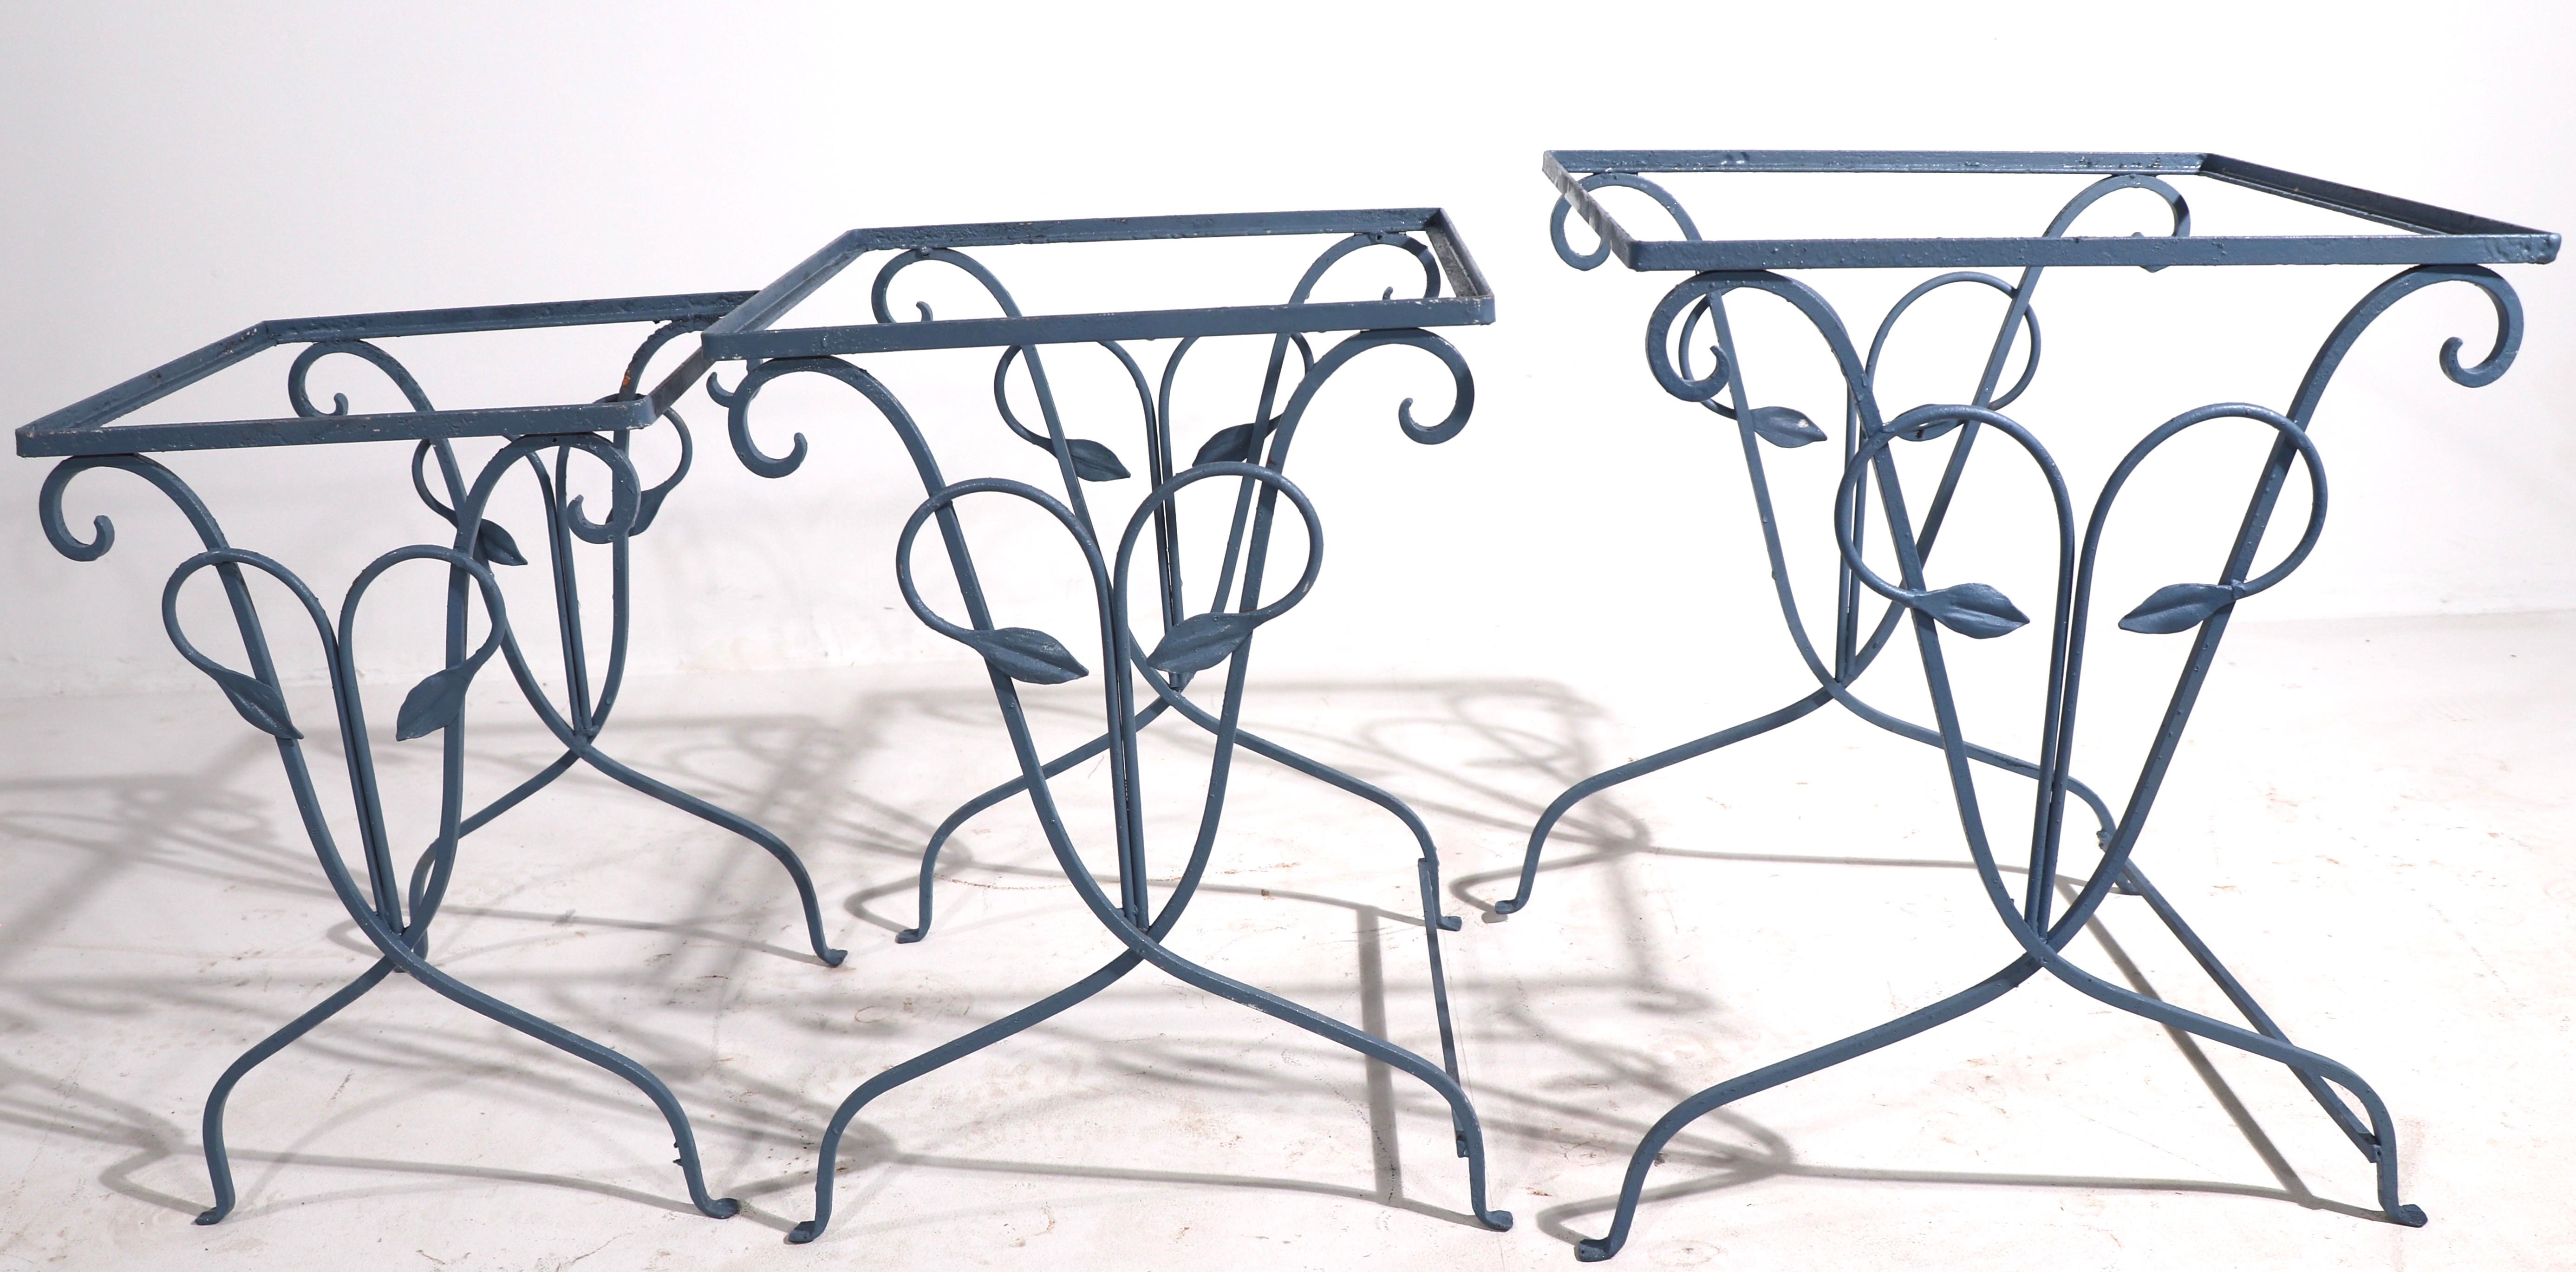 Charming set of three nesting tables in decorative wrought iron foliate pattern. Very well crafted, quality vintage metalwork, currently in later blue paint finish. Unusual to find sets of three still together and intact. Selling without glass